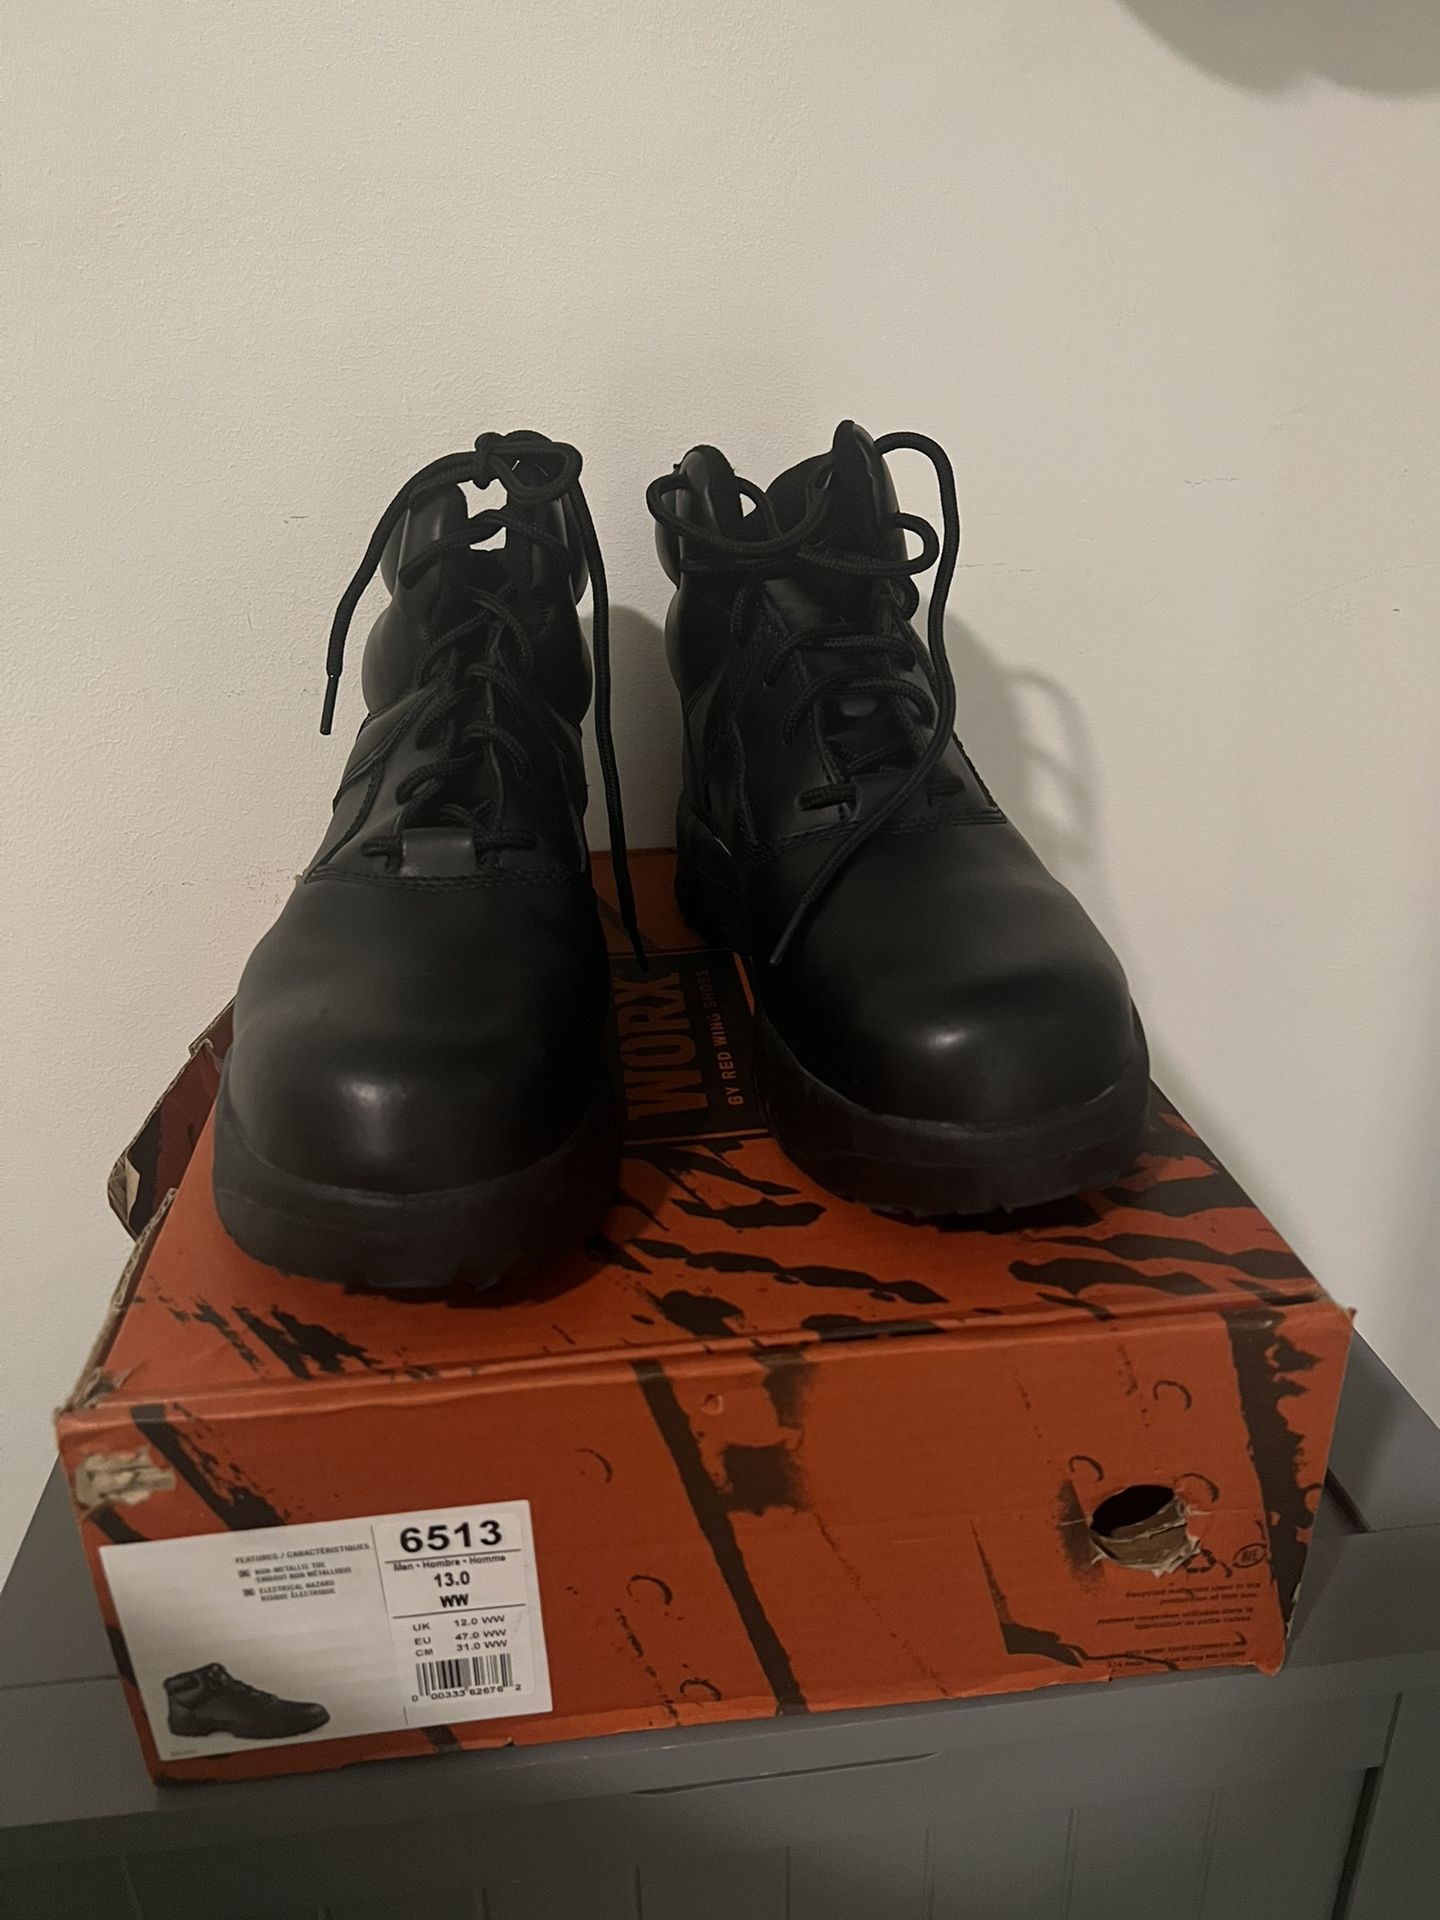 1513 WorxRed Wing Shoes Size 13 Black NEW